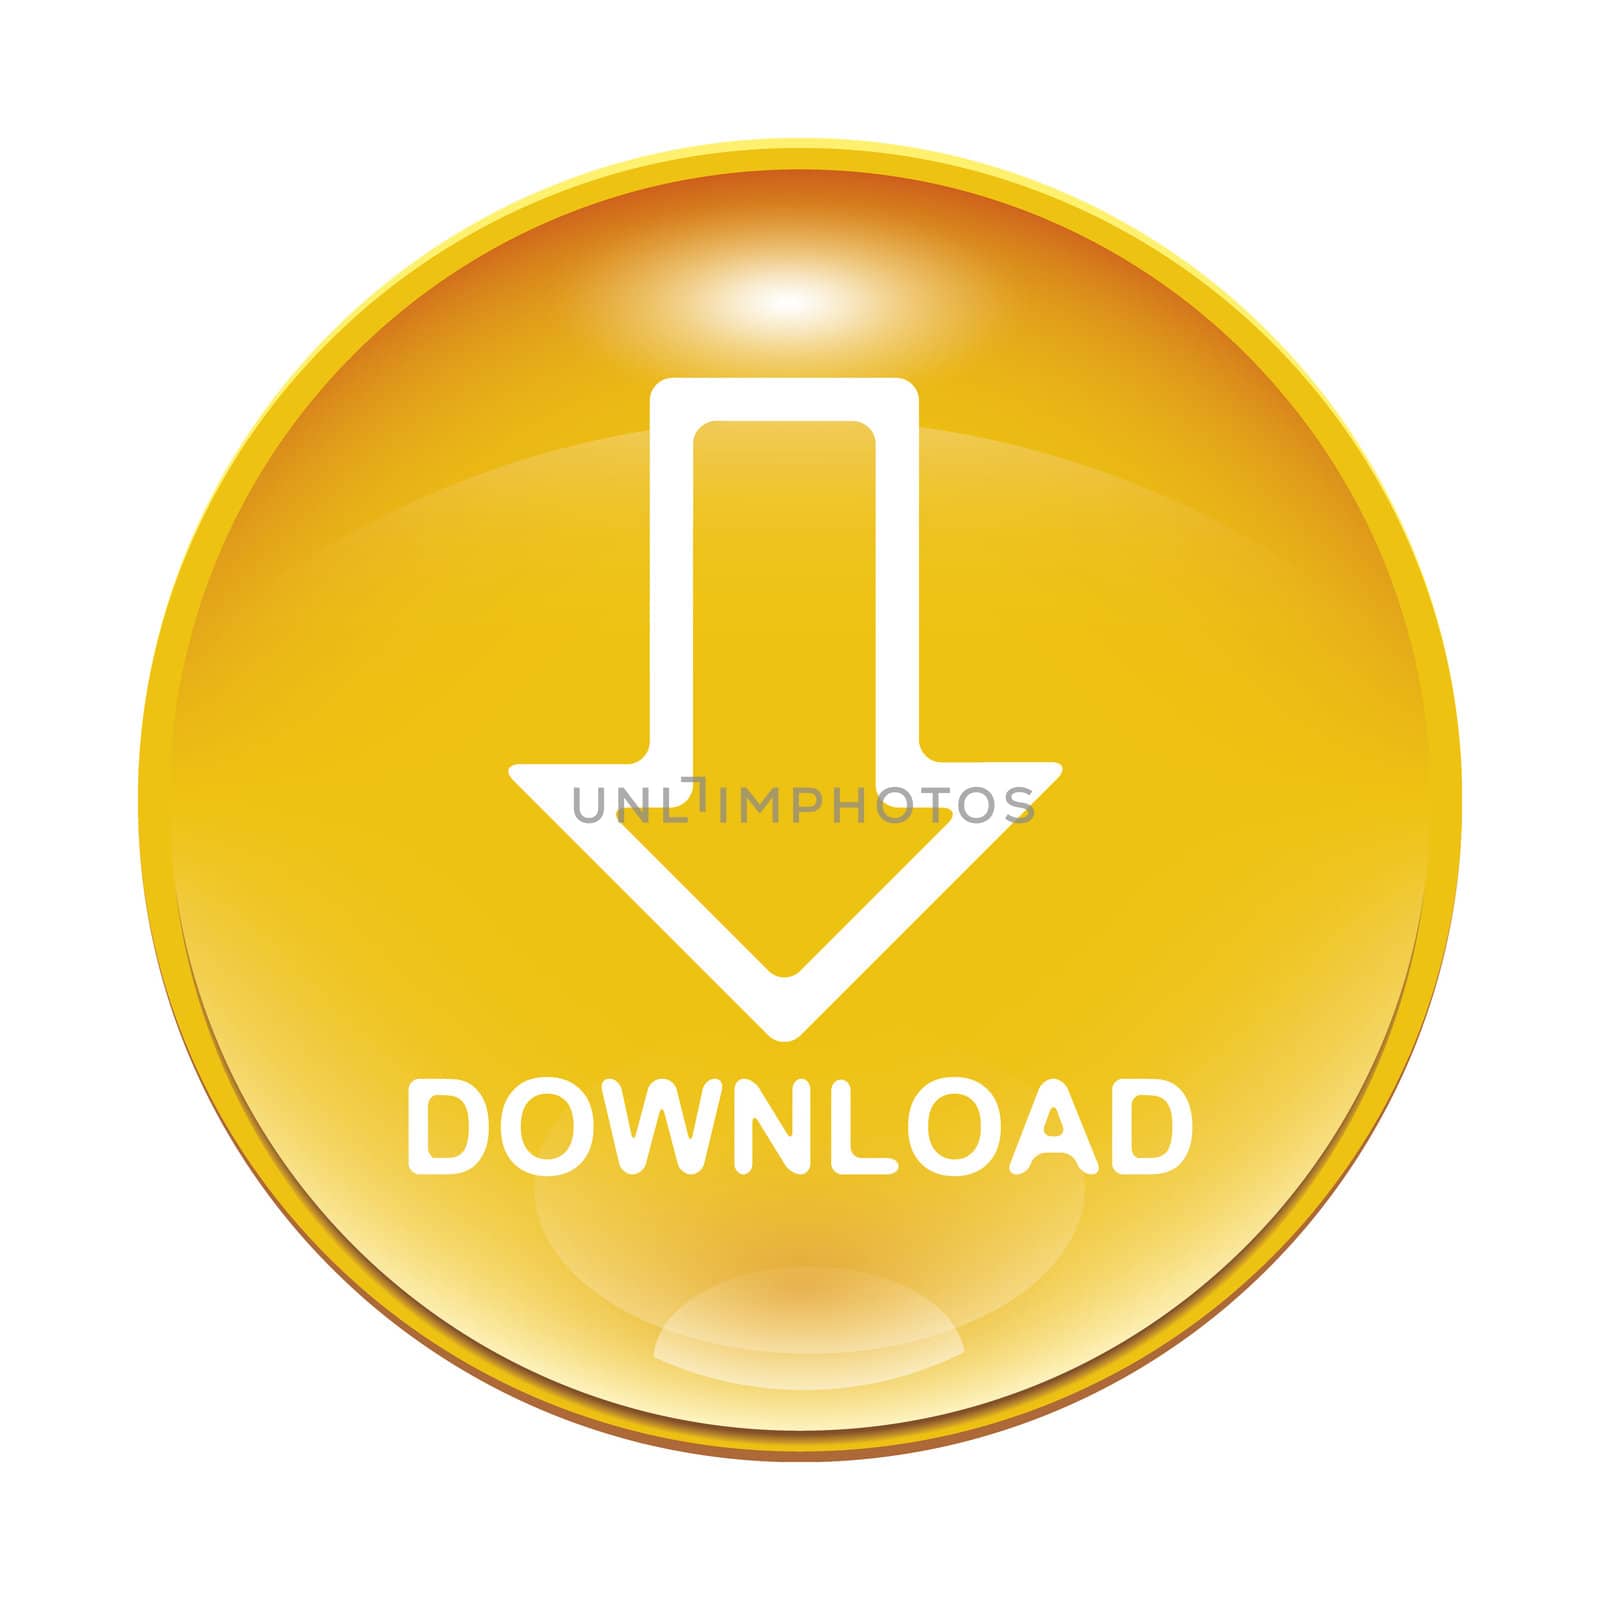 An image of a yellow download icon